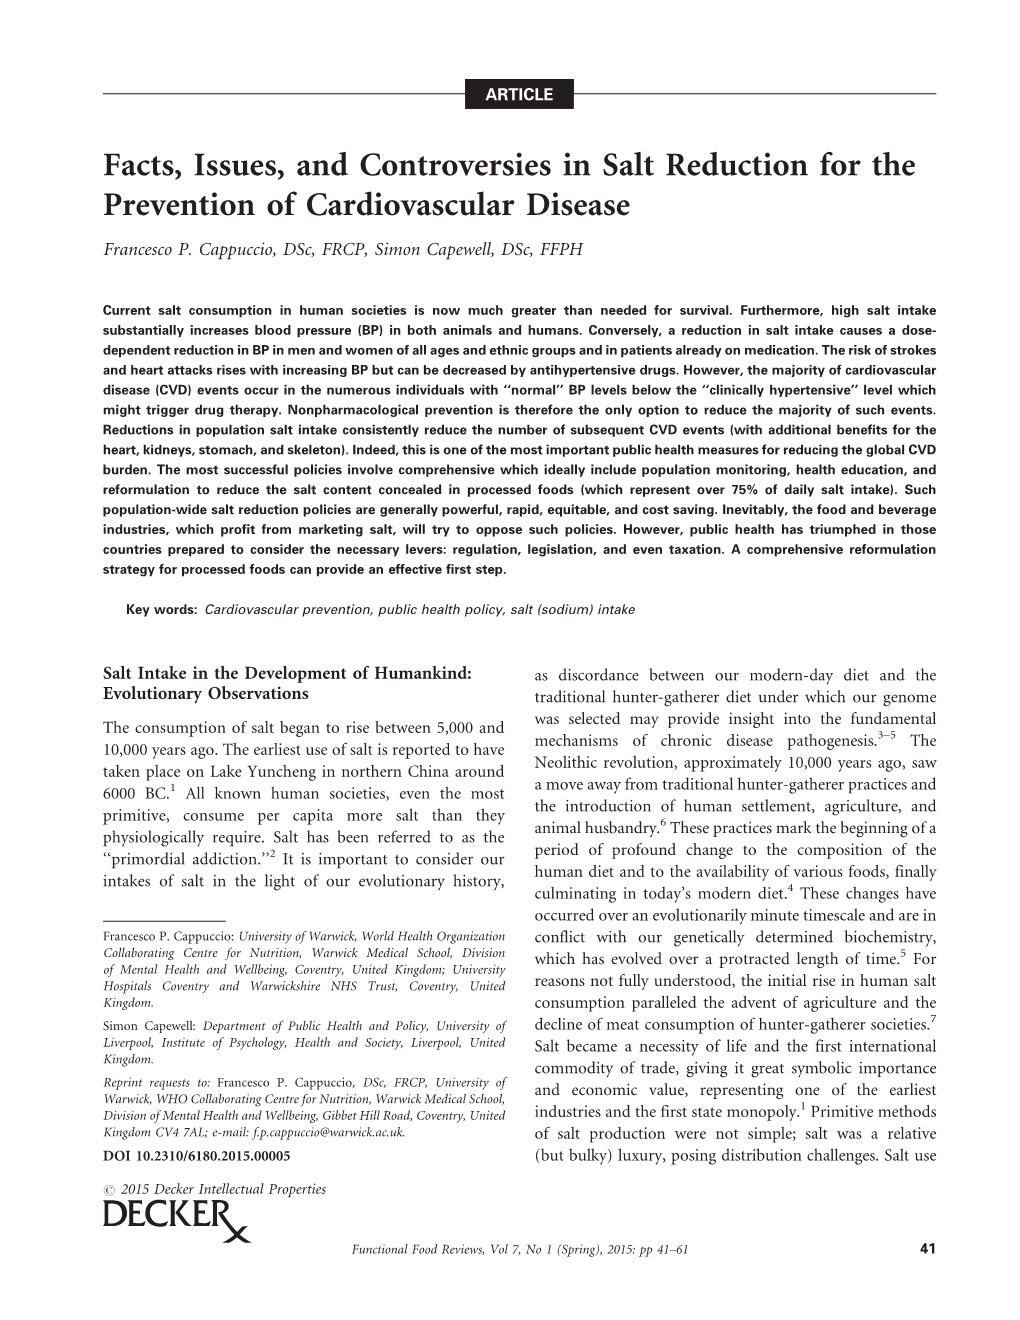 Facts, Issues, and Controversies in Salt Reduction for the Prevention of Cardiovascular Disease Francesco P